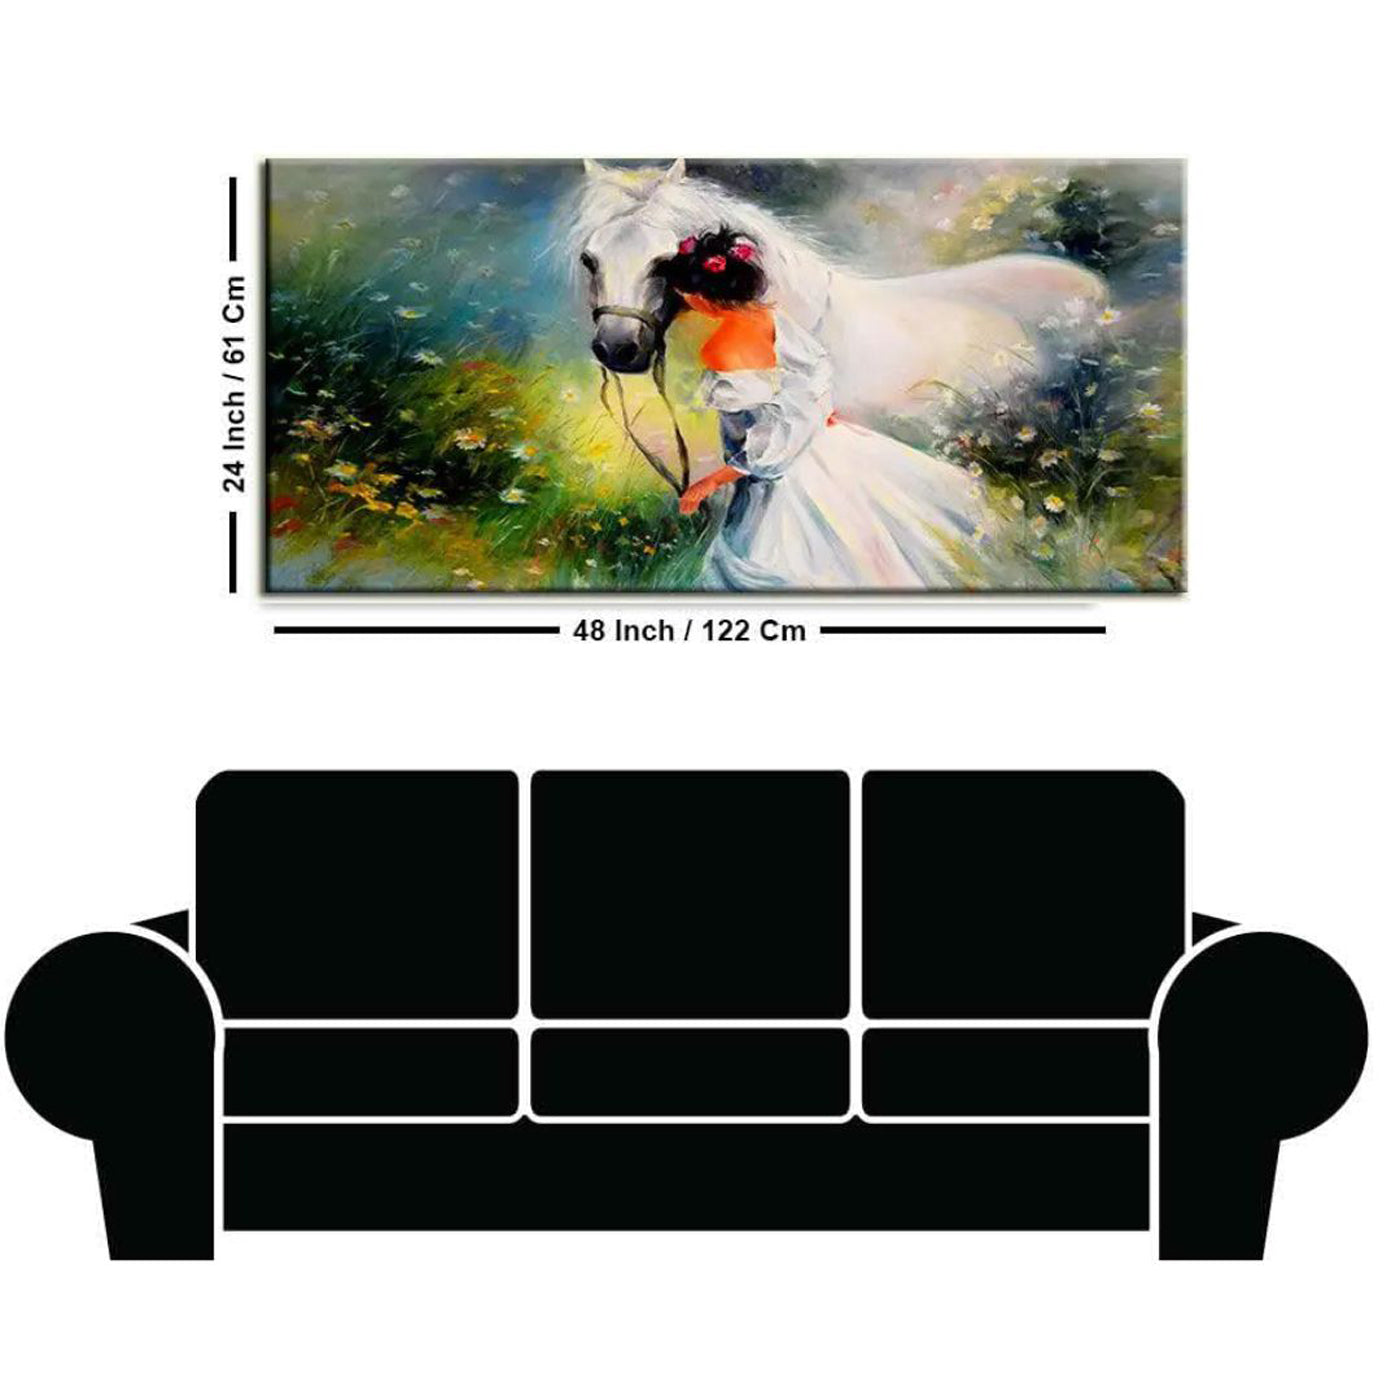 Big panoramic girl with a horse canvas wall painting with Floating Frame